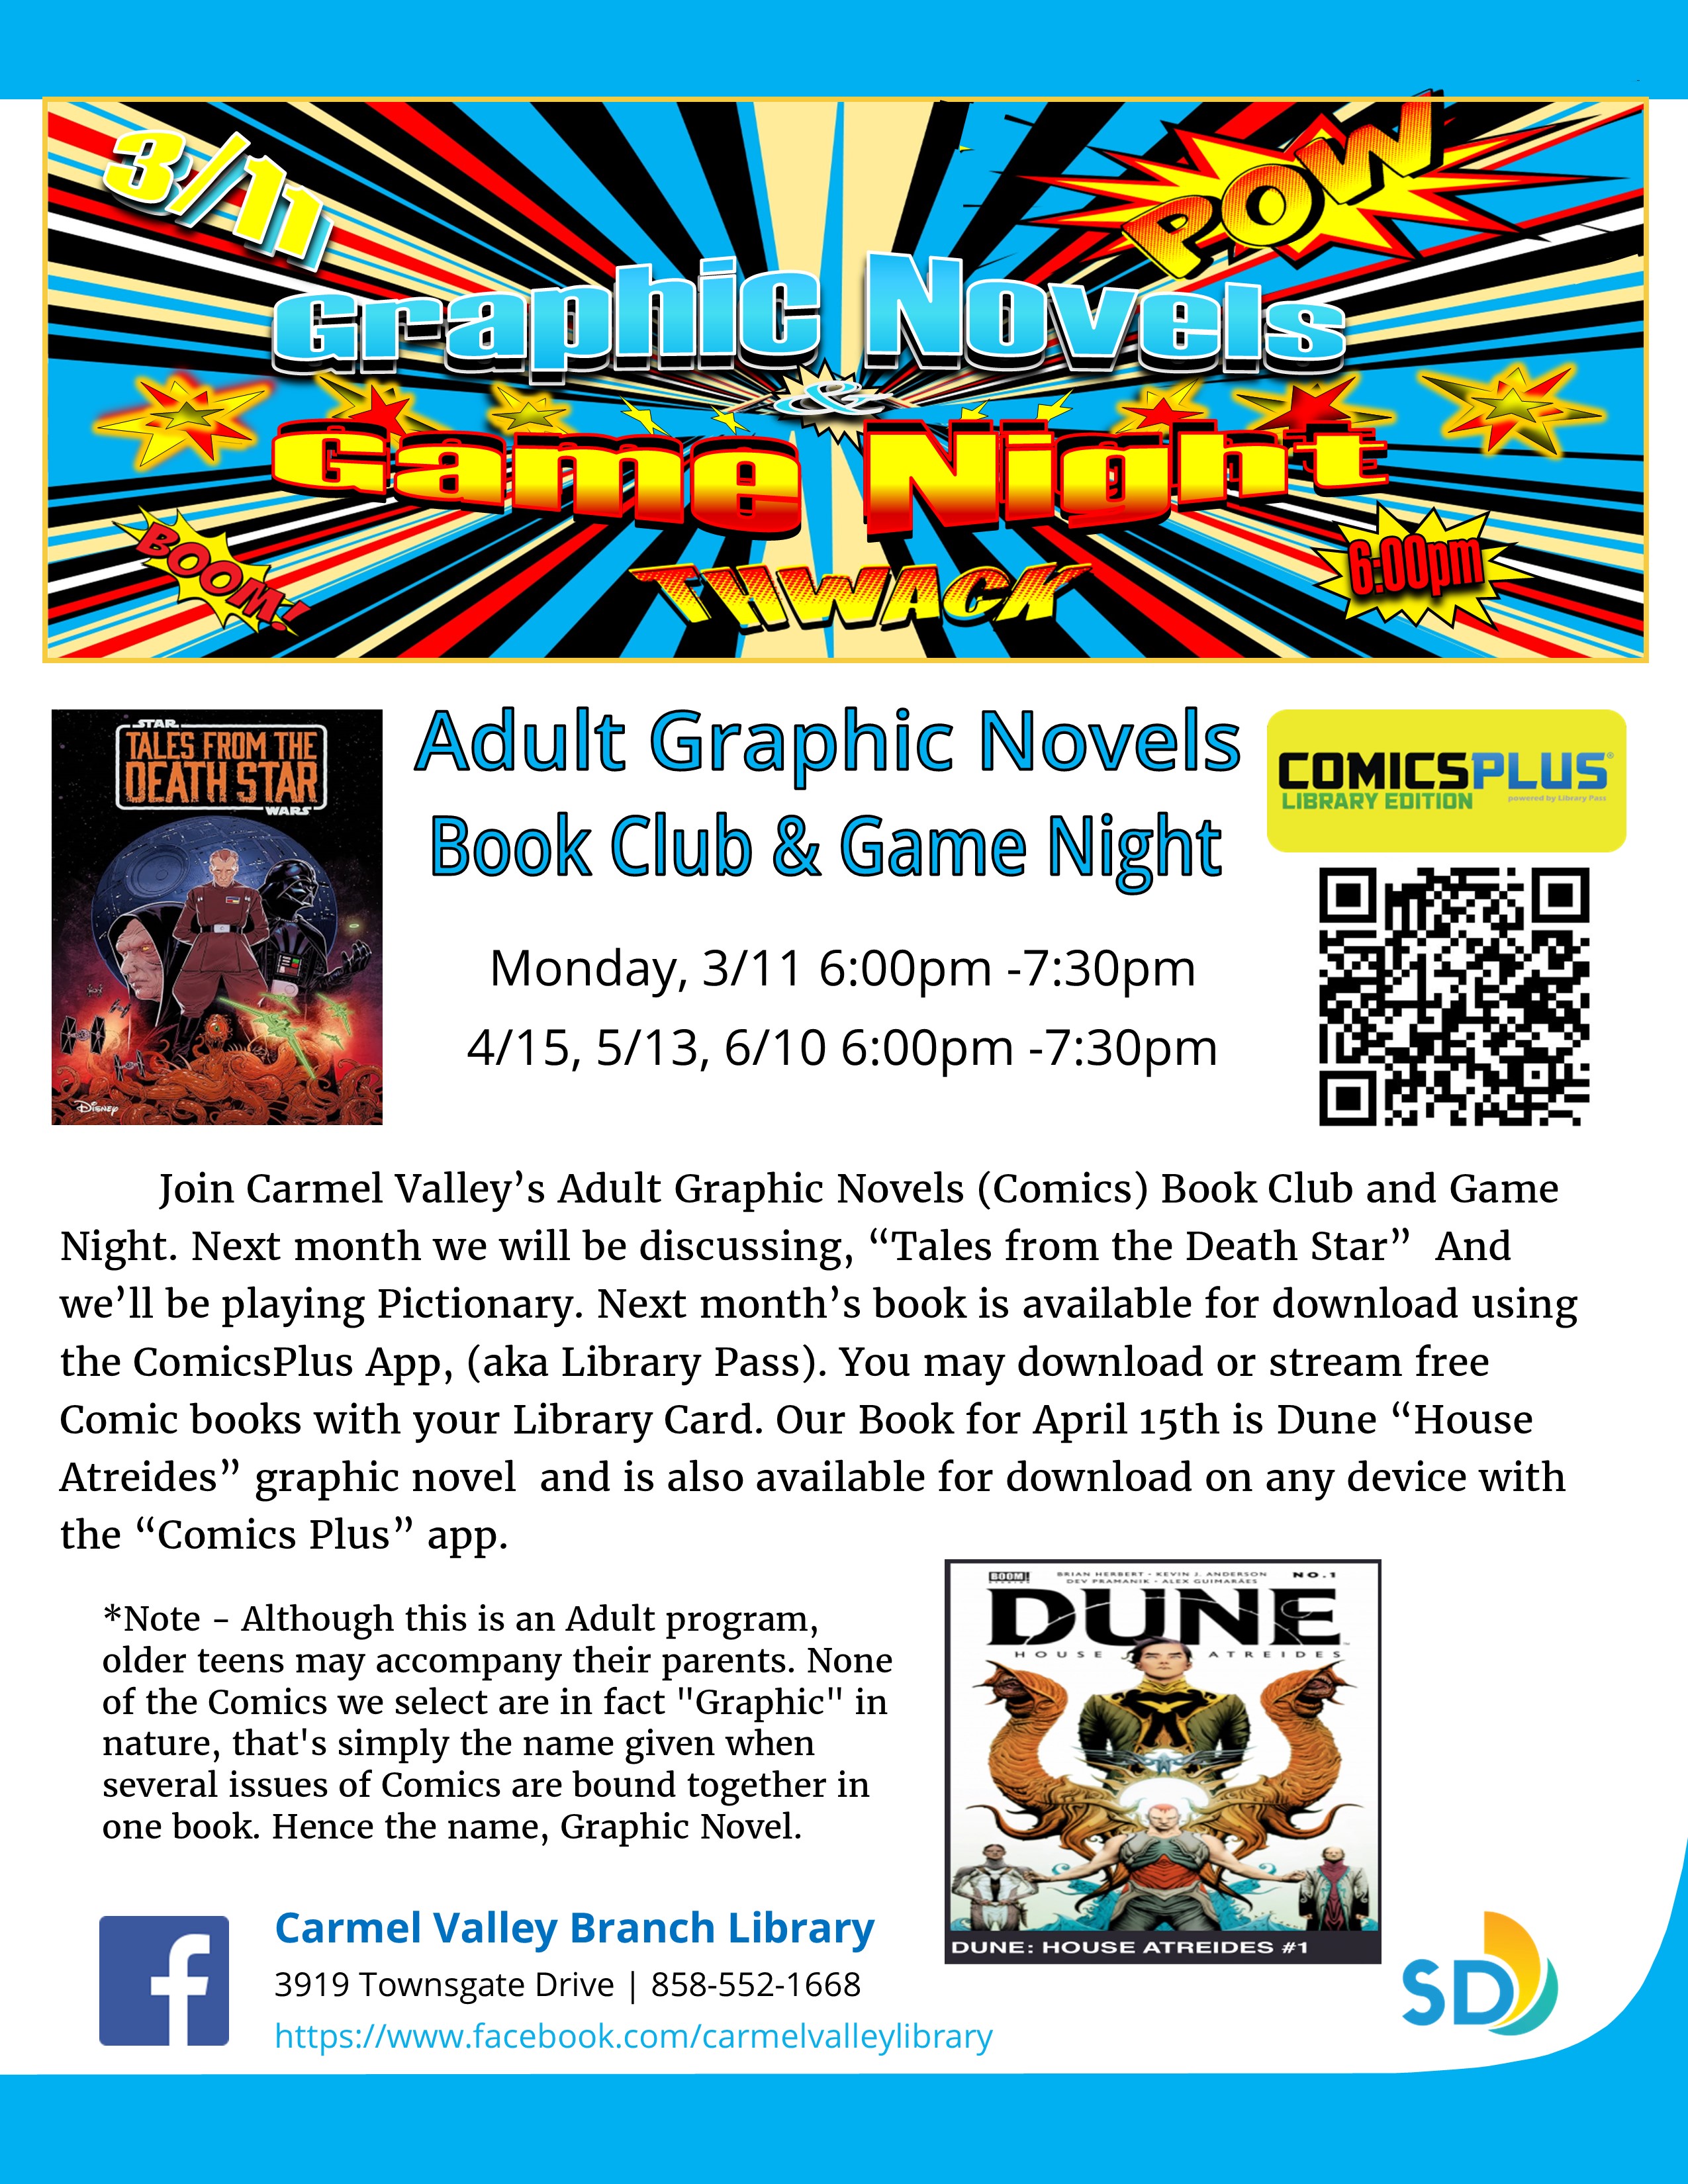 Join us 3/11 6:00pm-7:30pm for Comics, Games and Fun!